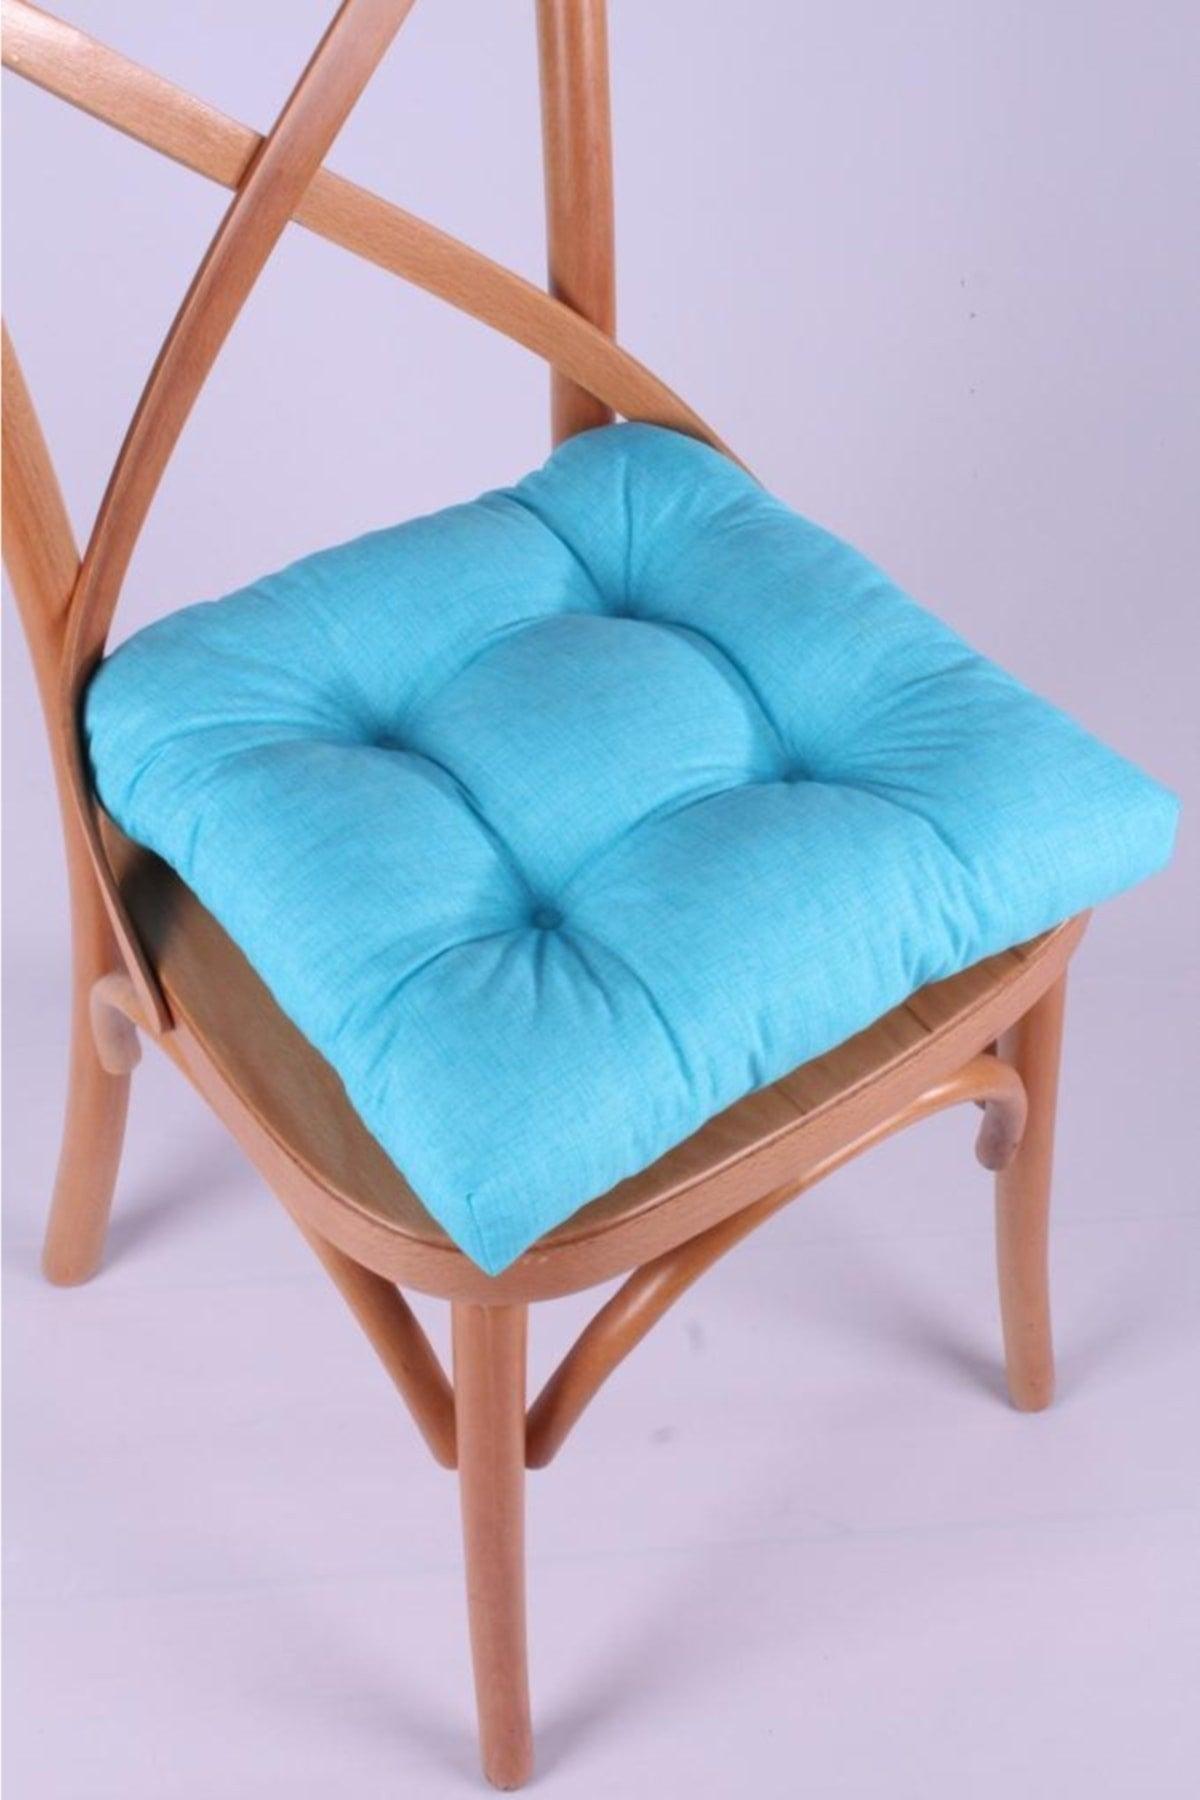 Lina Pofidik Turquoise Chair Cushion Specially Stitched Laced 40x40cm - Swordslife